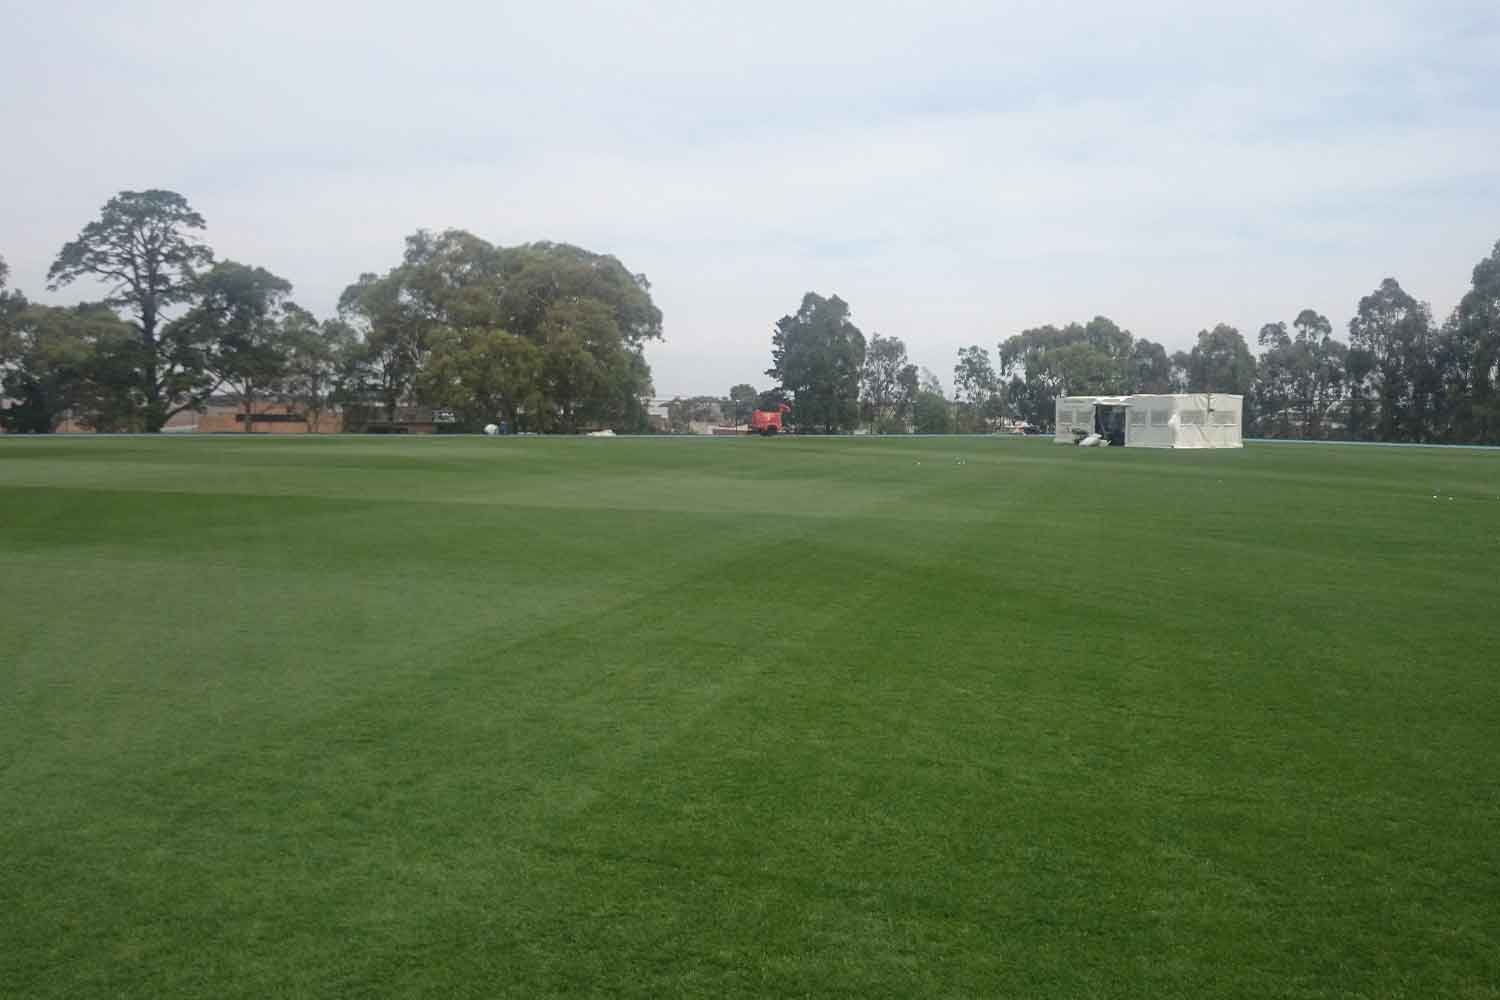 Panoramic view of a soccer sports field using a hybrid turf surface